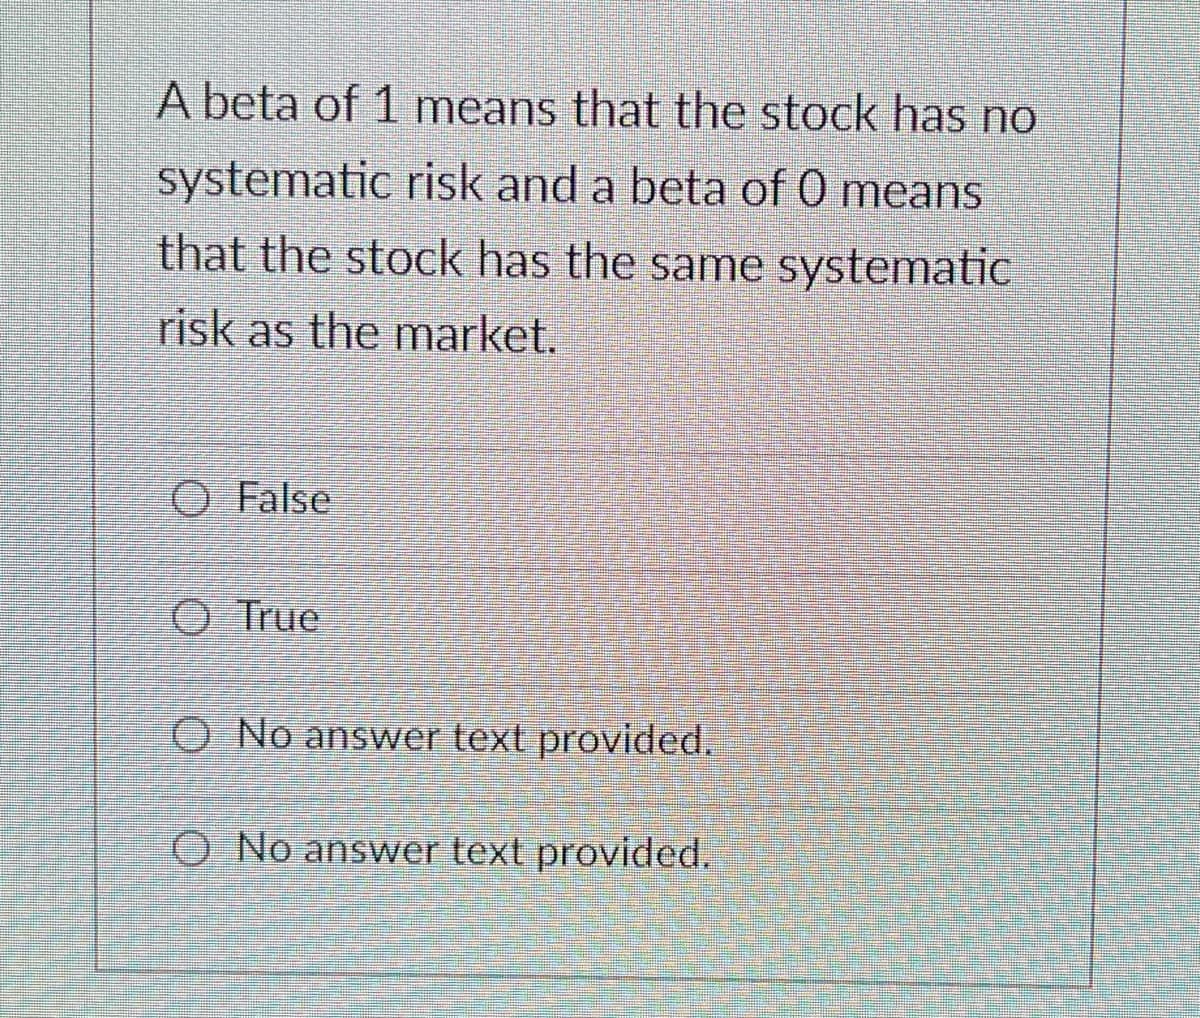 A beta of 1 means that the stock has no
systematic risk and a beta of 0 means
that the stock has the same systematic
risk as the market.
O False
O True
O No answer text provided.
O No answer text provided.
